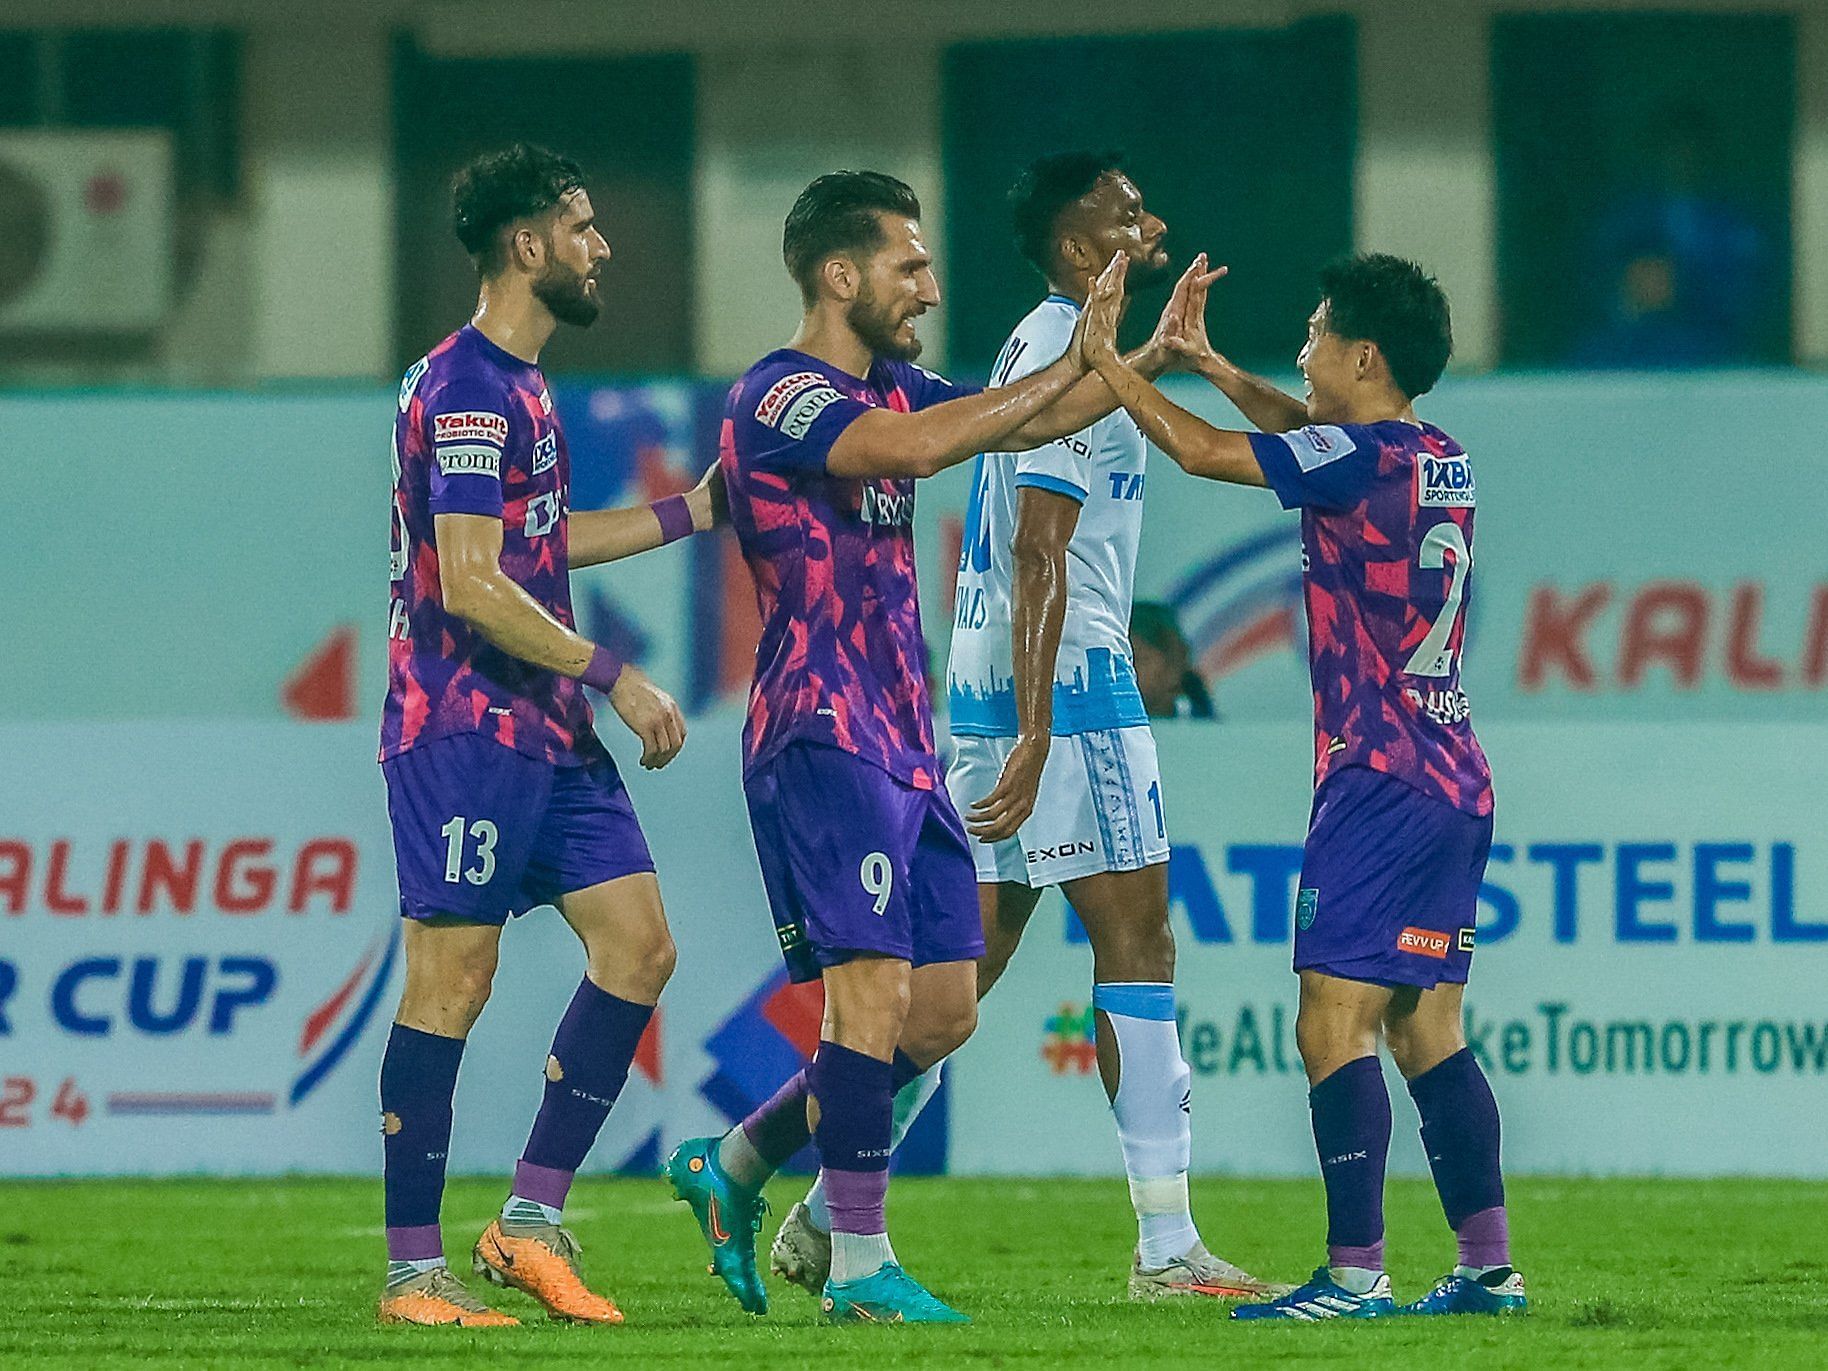 Kerala Blasters crashed out of the Super Cup after being defeated by Jamshedpur FC.